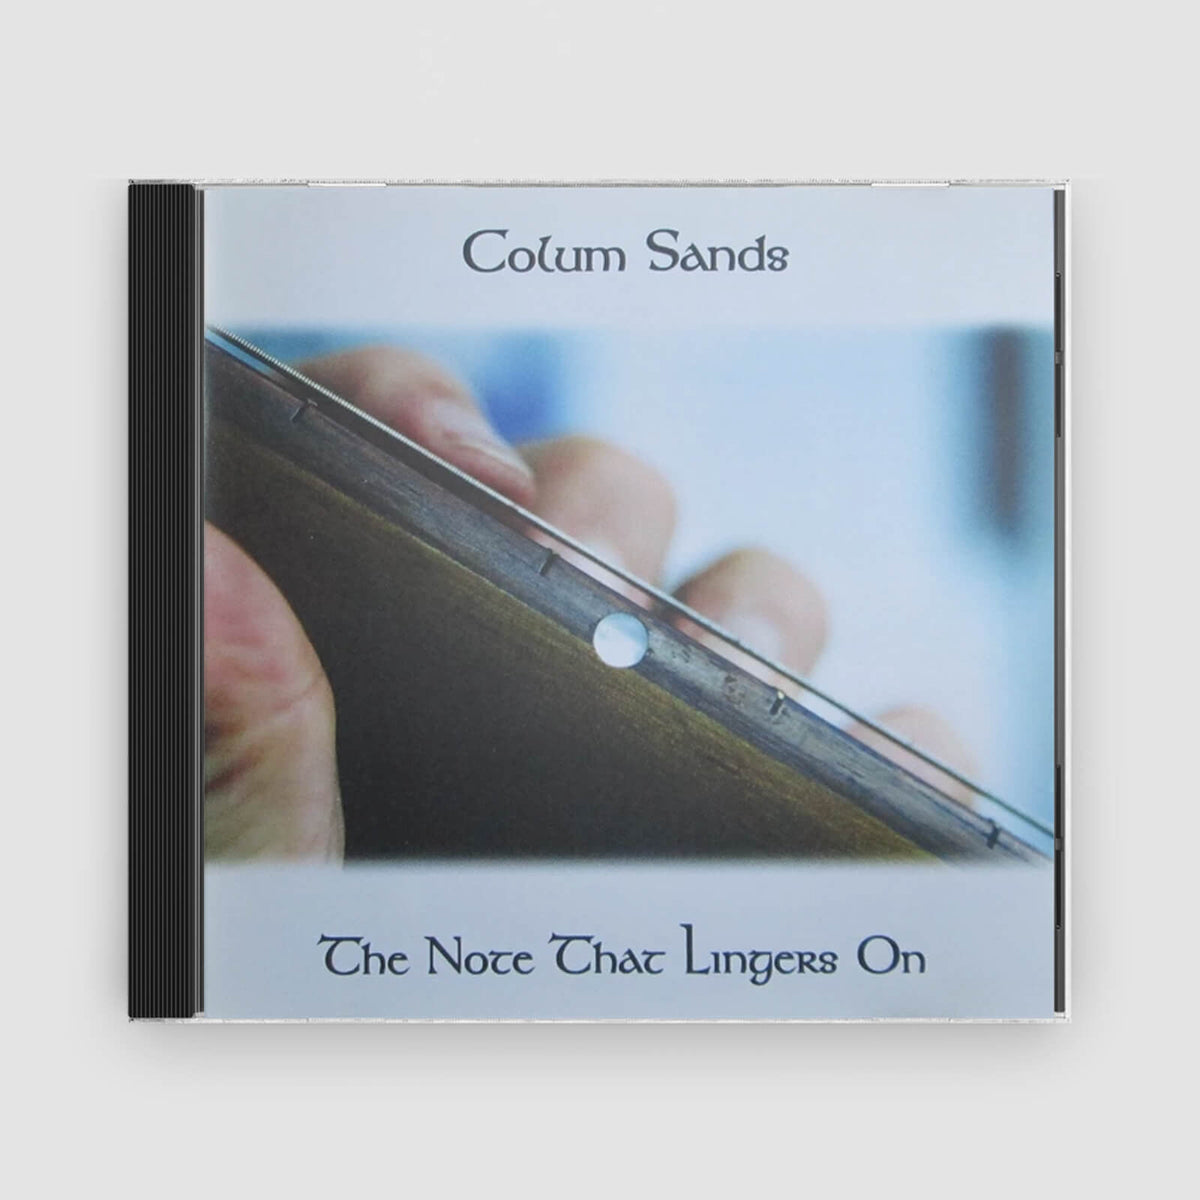 Colum Sands : The Note That Lingers On